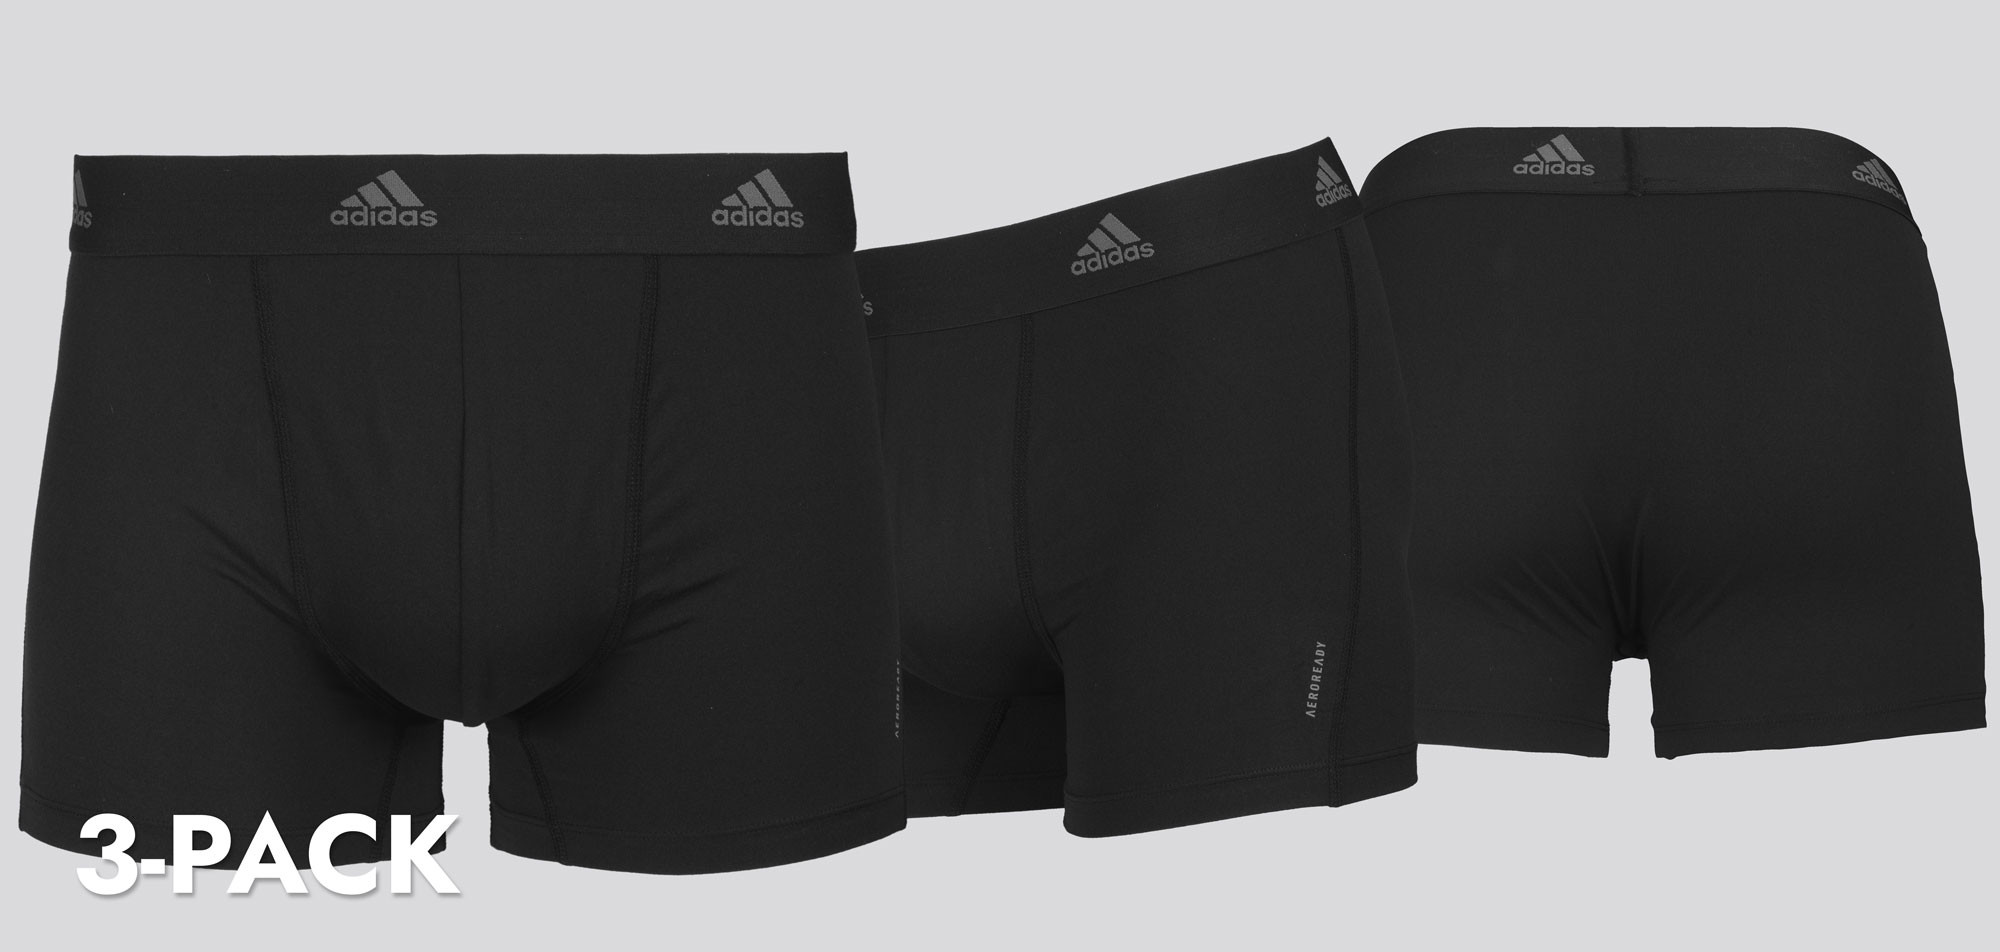 Adidas Trunk 3-Pack 4A3M02 Active Micro Flex Eco,